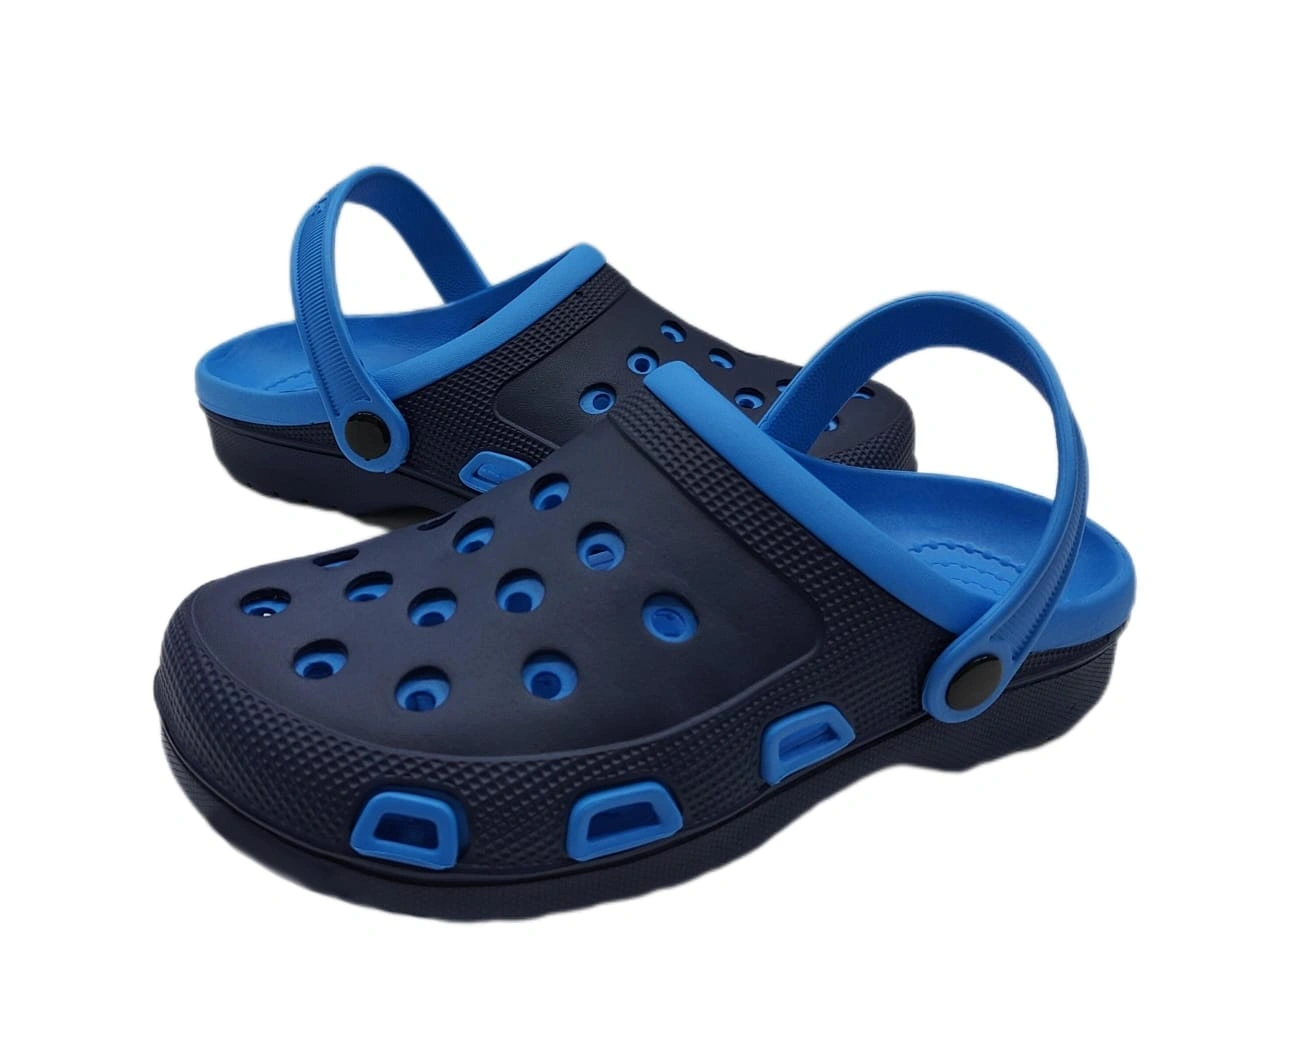 Clog Sandals for Men and Women: Comfortable, Lightweight Design with Durable Upper and Slip-Resistant Outsole for All-Day Wear-Blue-UK 7-2